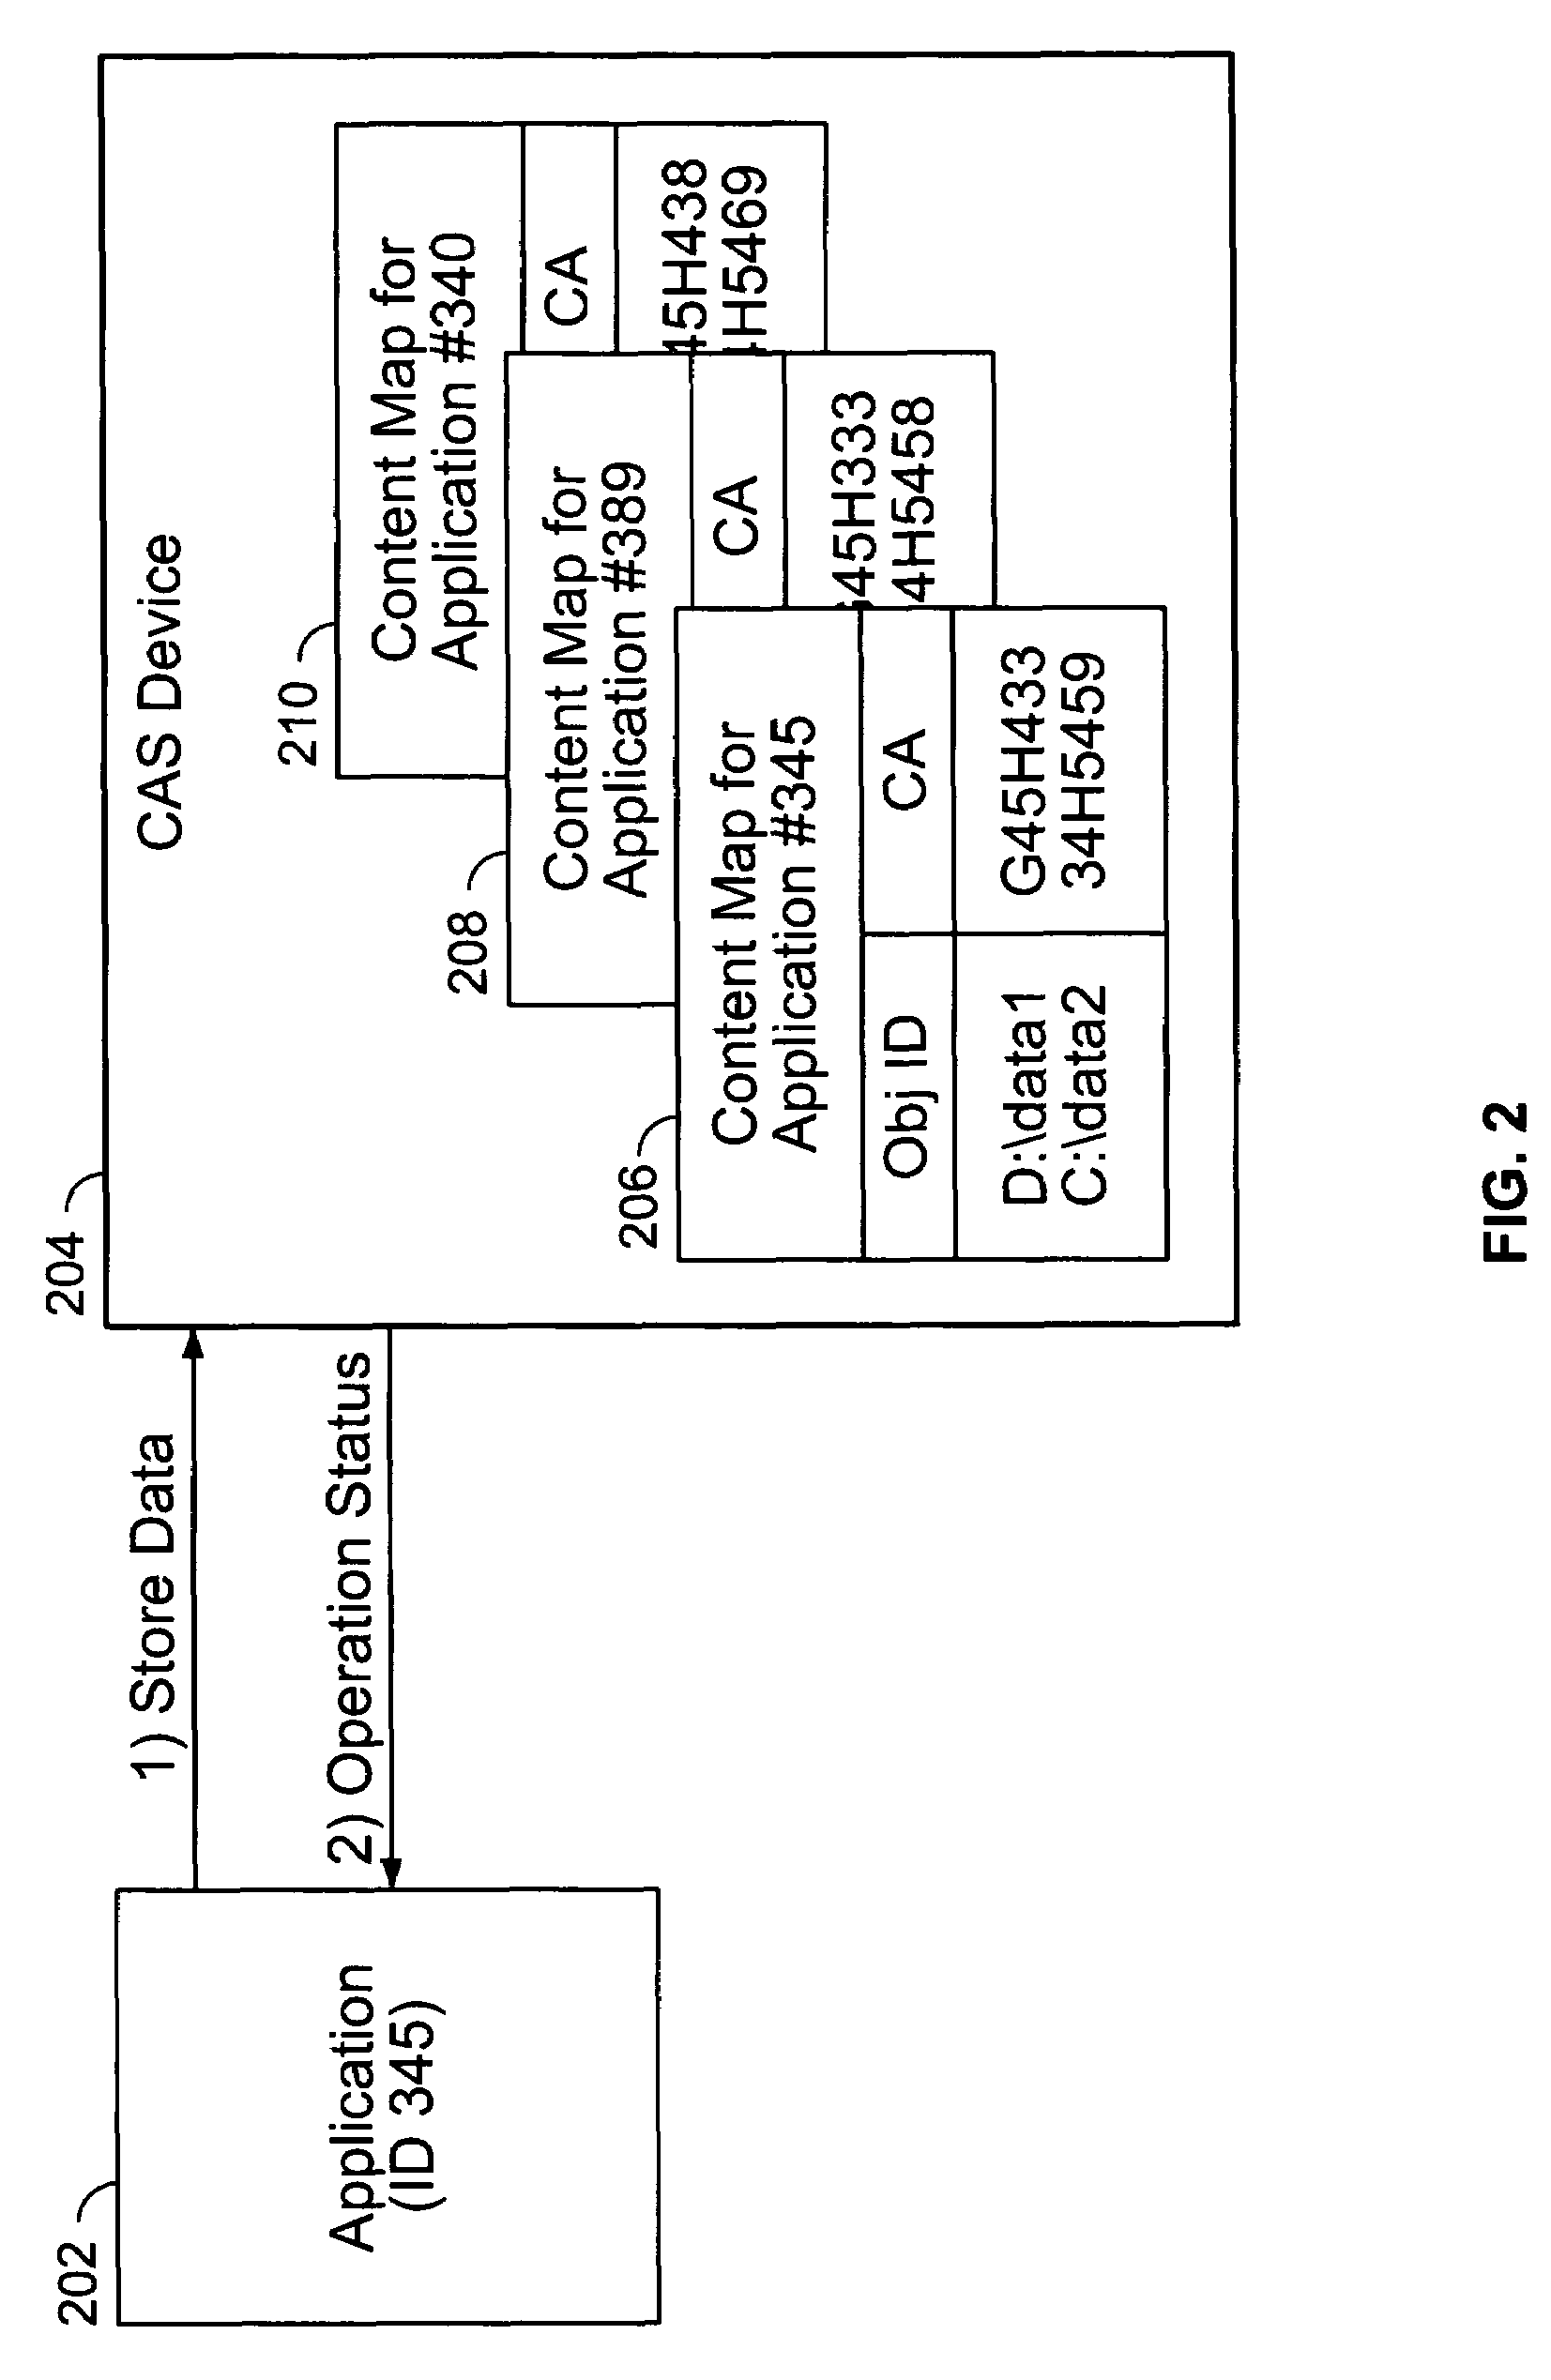 Content addressed storage device configured to maintain content address mapping